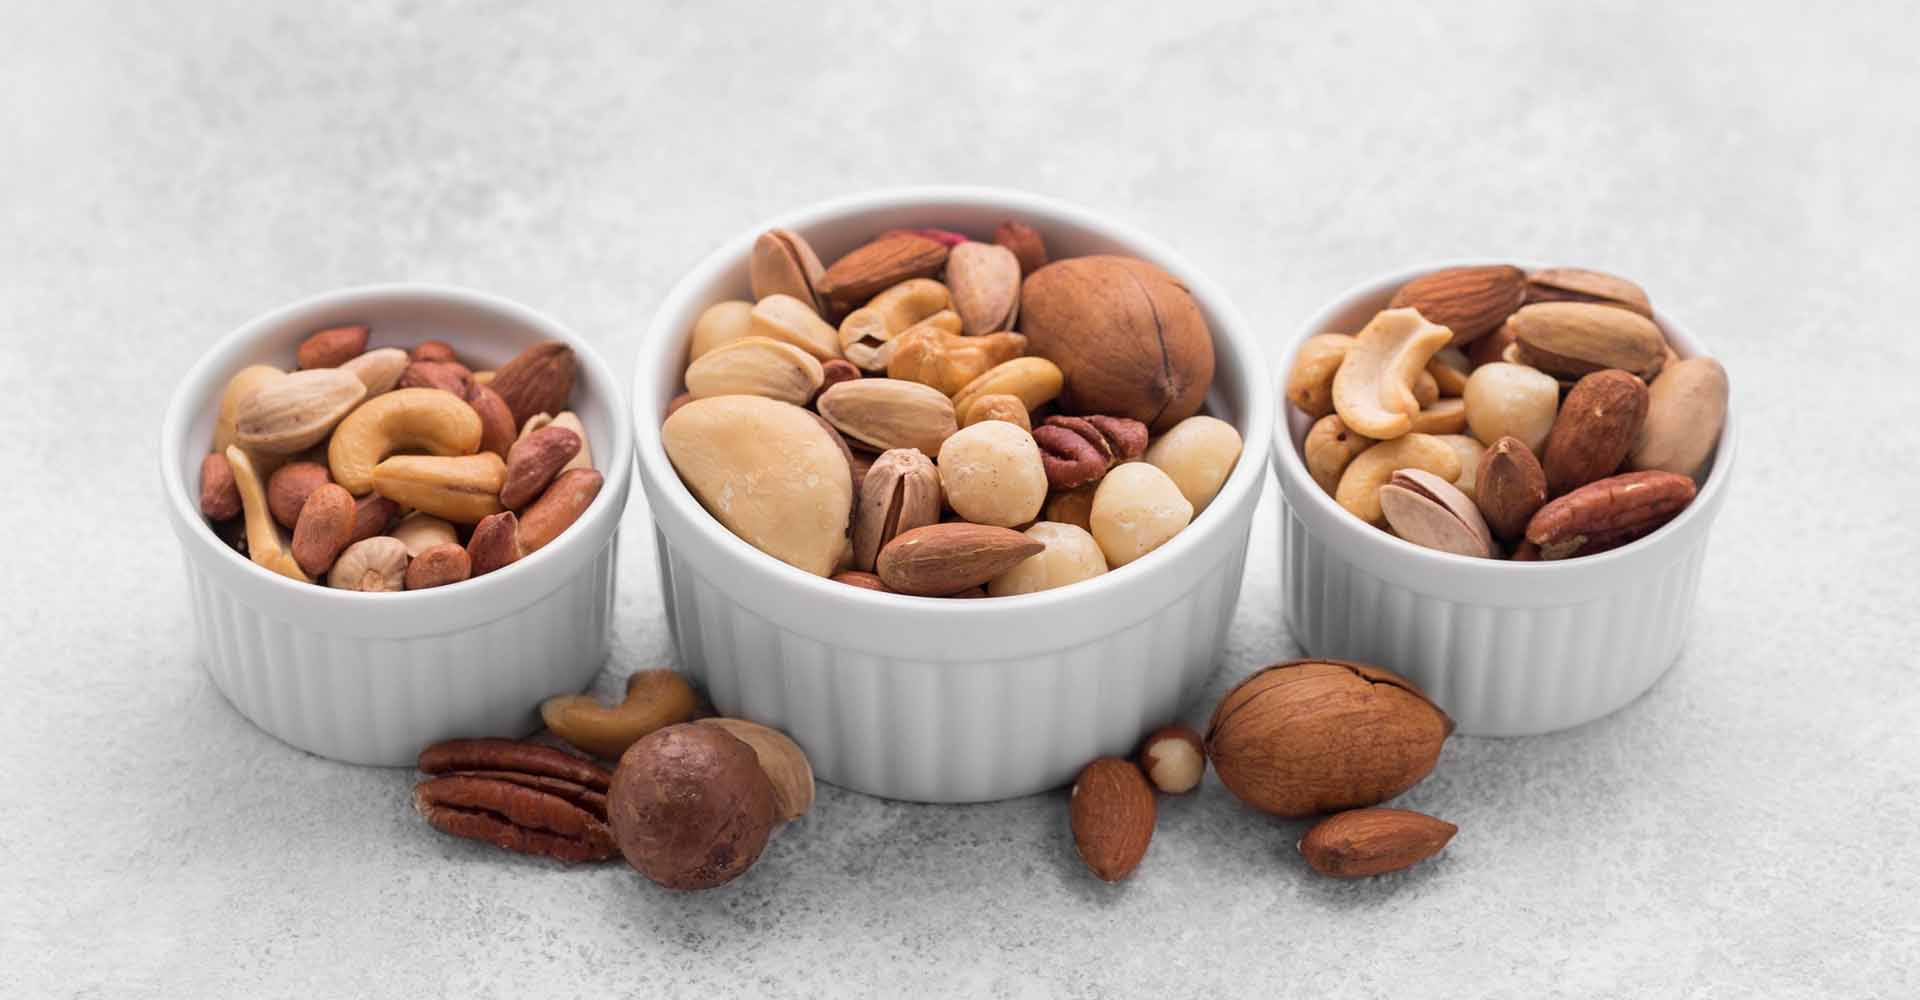 TYPES OF NUTS